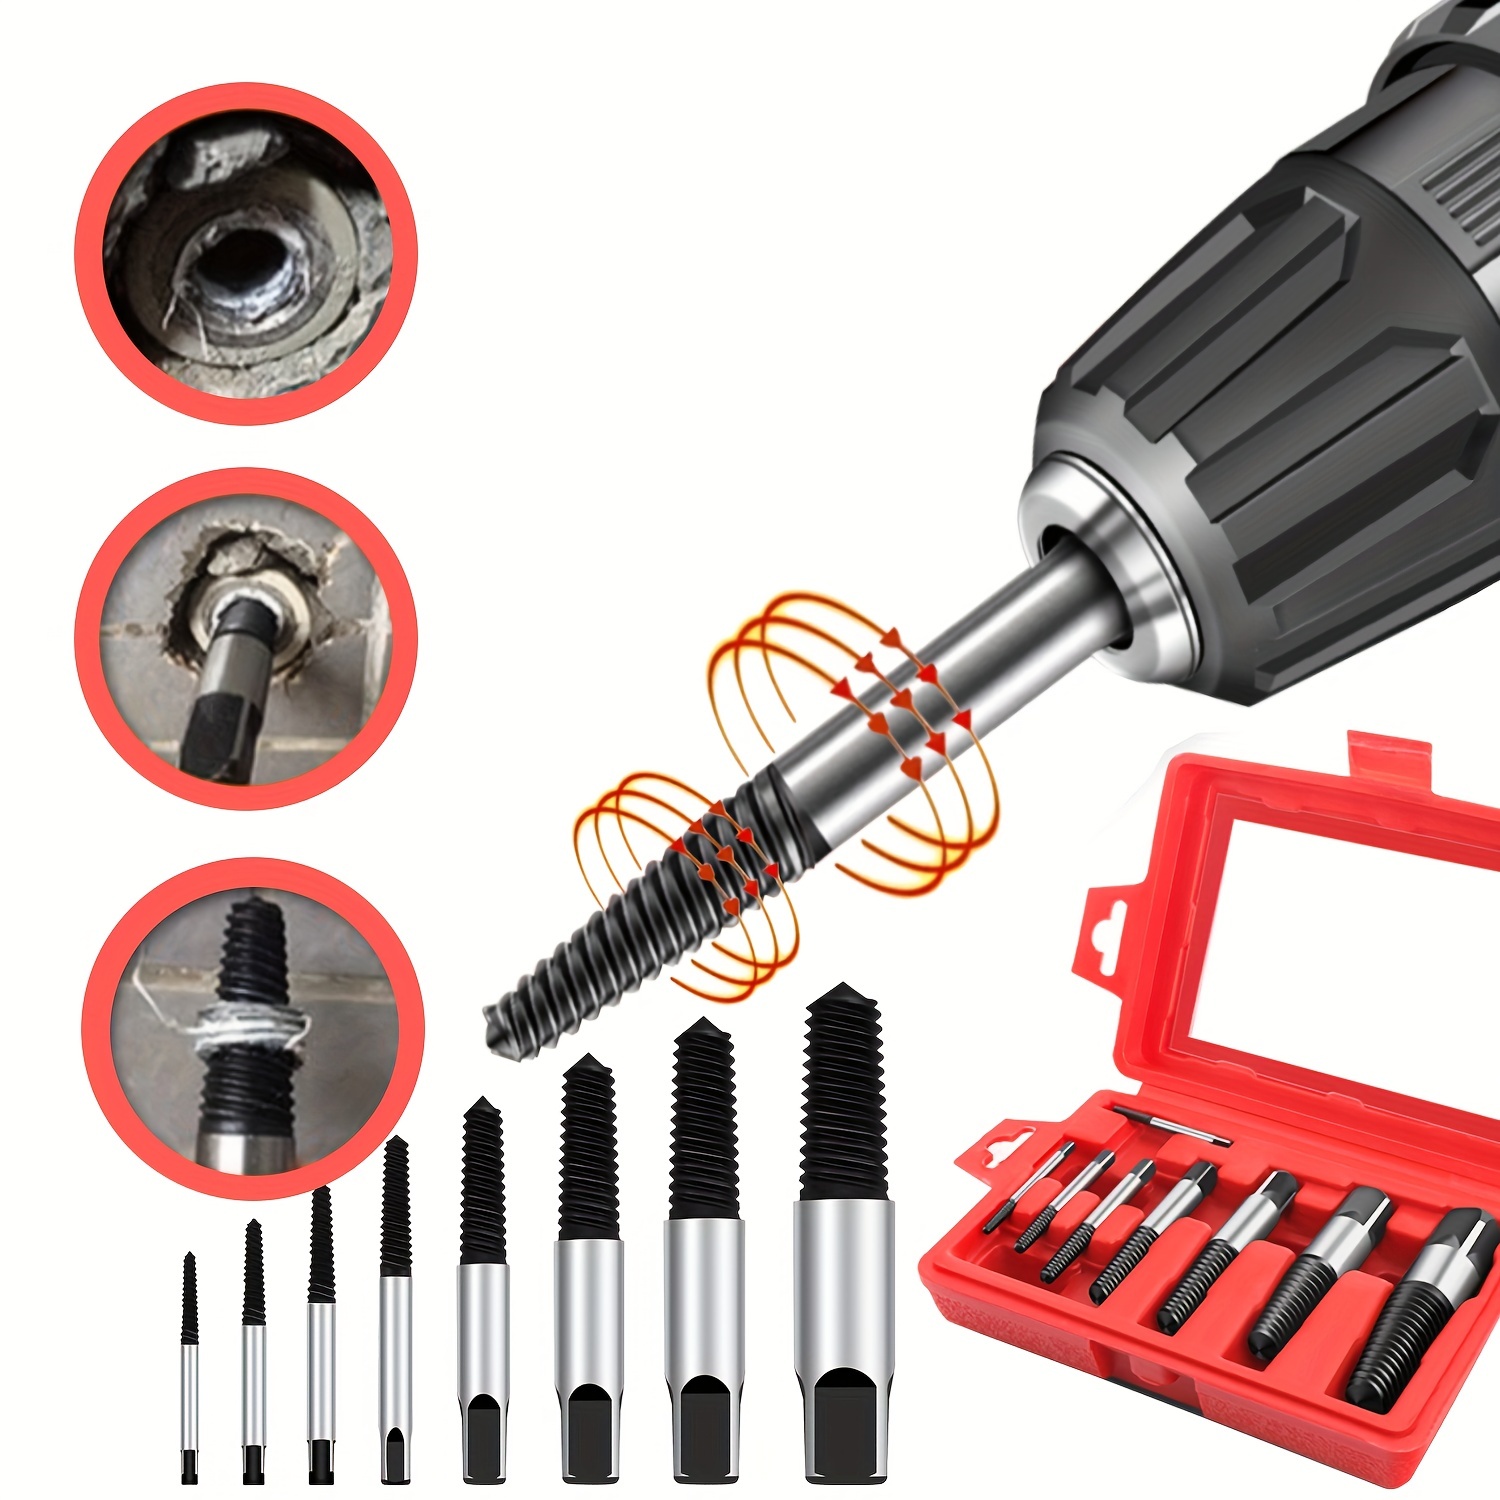 8pcs) Pipe Screw Extractor Set,Damaged Screw Broken Bolt Water Pipe Remover  Set